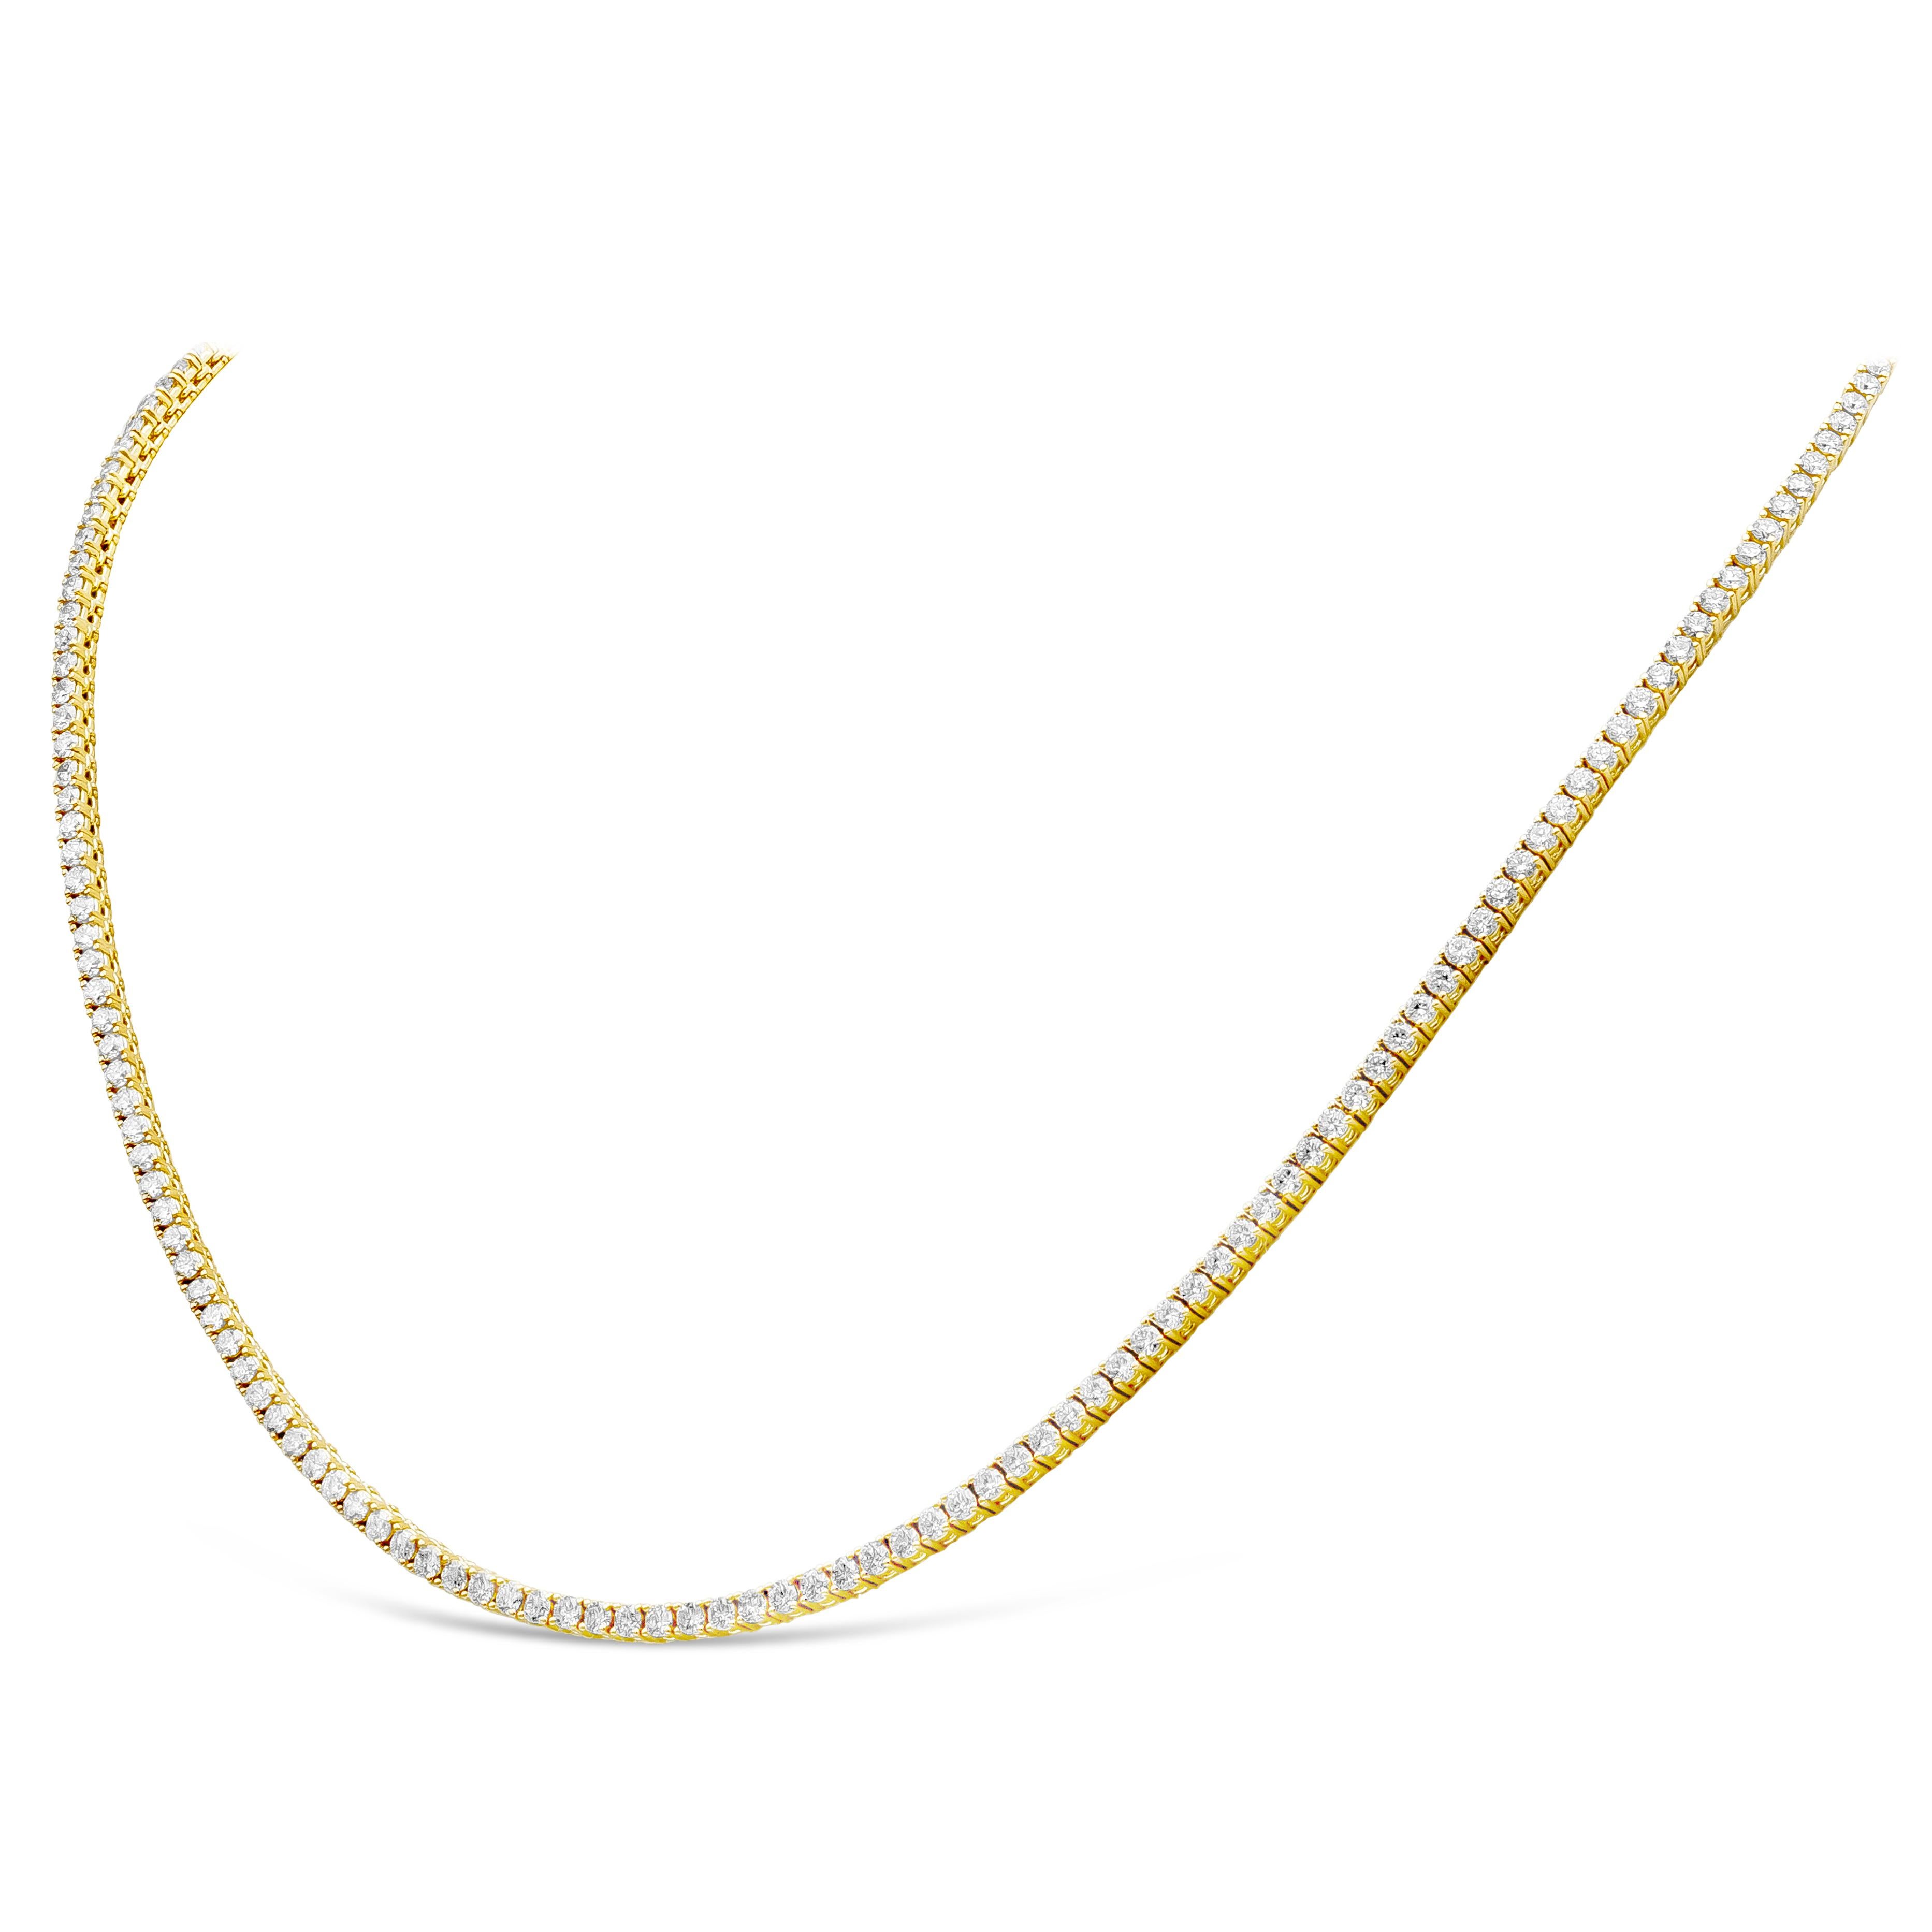 A classic tennis necklace style showcasing 192 round brilliant diamonds, set in a polished 18 karat yellow gold setting. Diamonds weigh 7.52 carats total and are approximately F color, VS-SI clarity.
18 inches in Length.

Roman Malakov is a custom